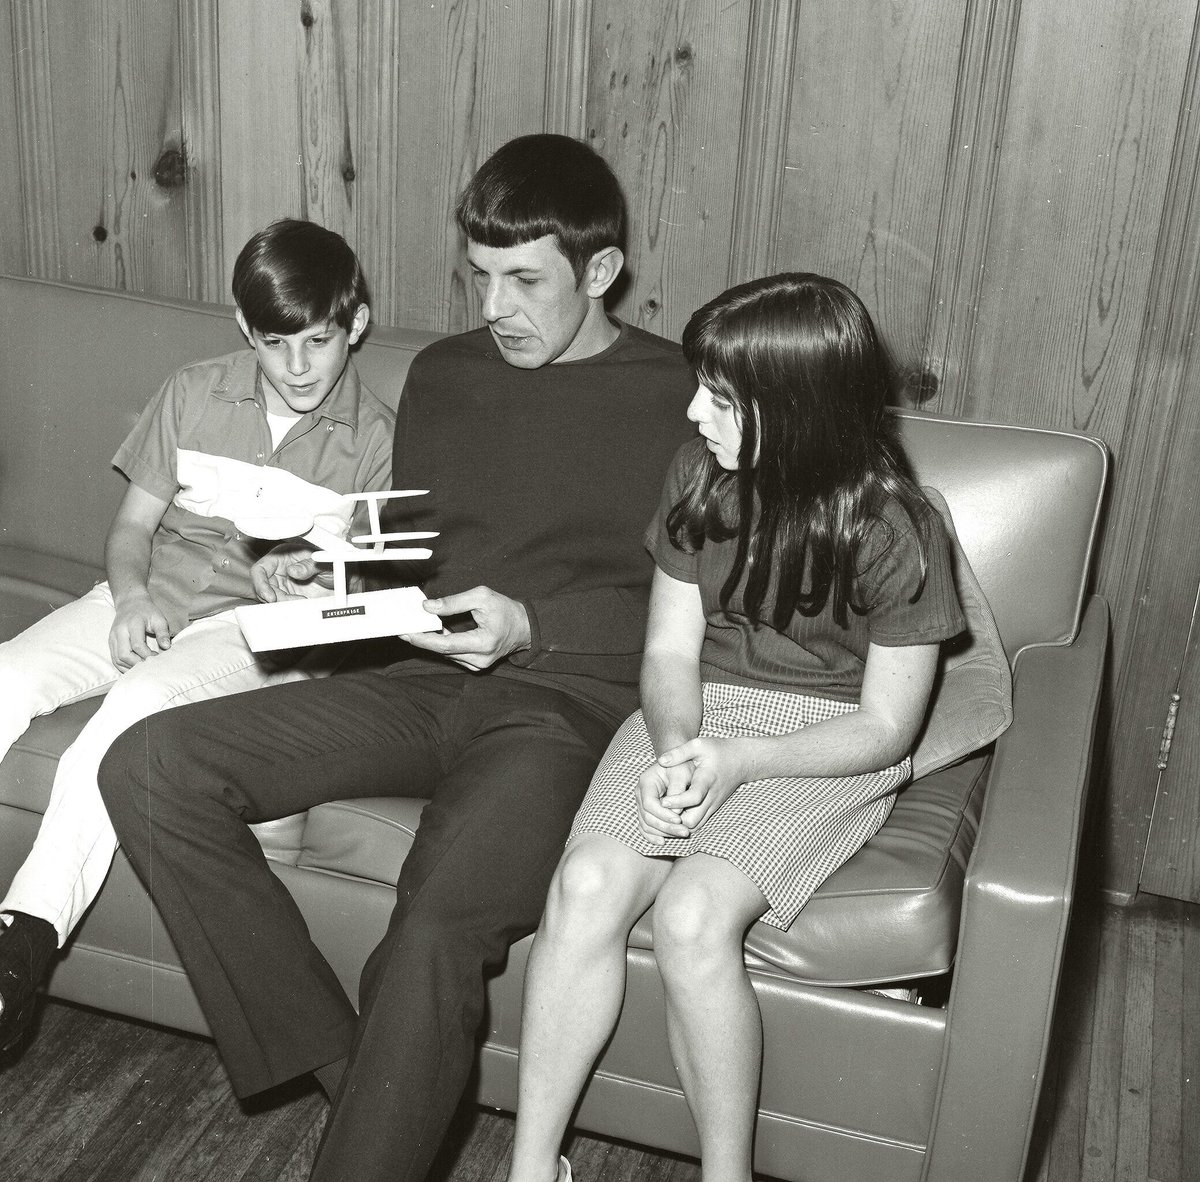 Dad showing me and my sister Julie a mockup of the Enterprise. Ah, those early days when Star Trek was new and exciting and fanzine photographers were showing up all the time. So grateful to have been old enough to remember so much of it. LLAP 🖖